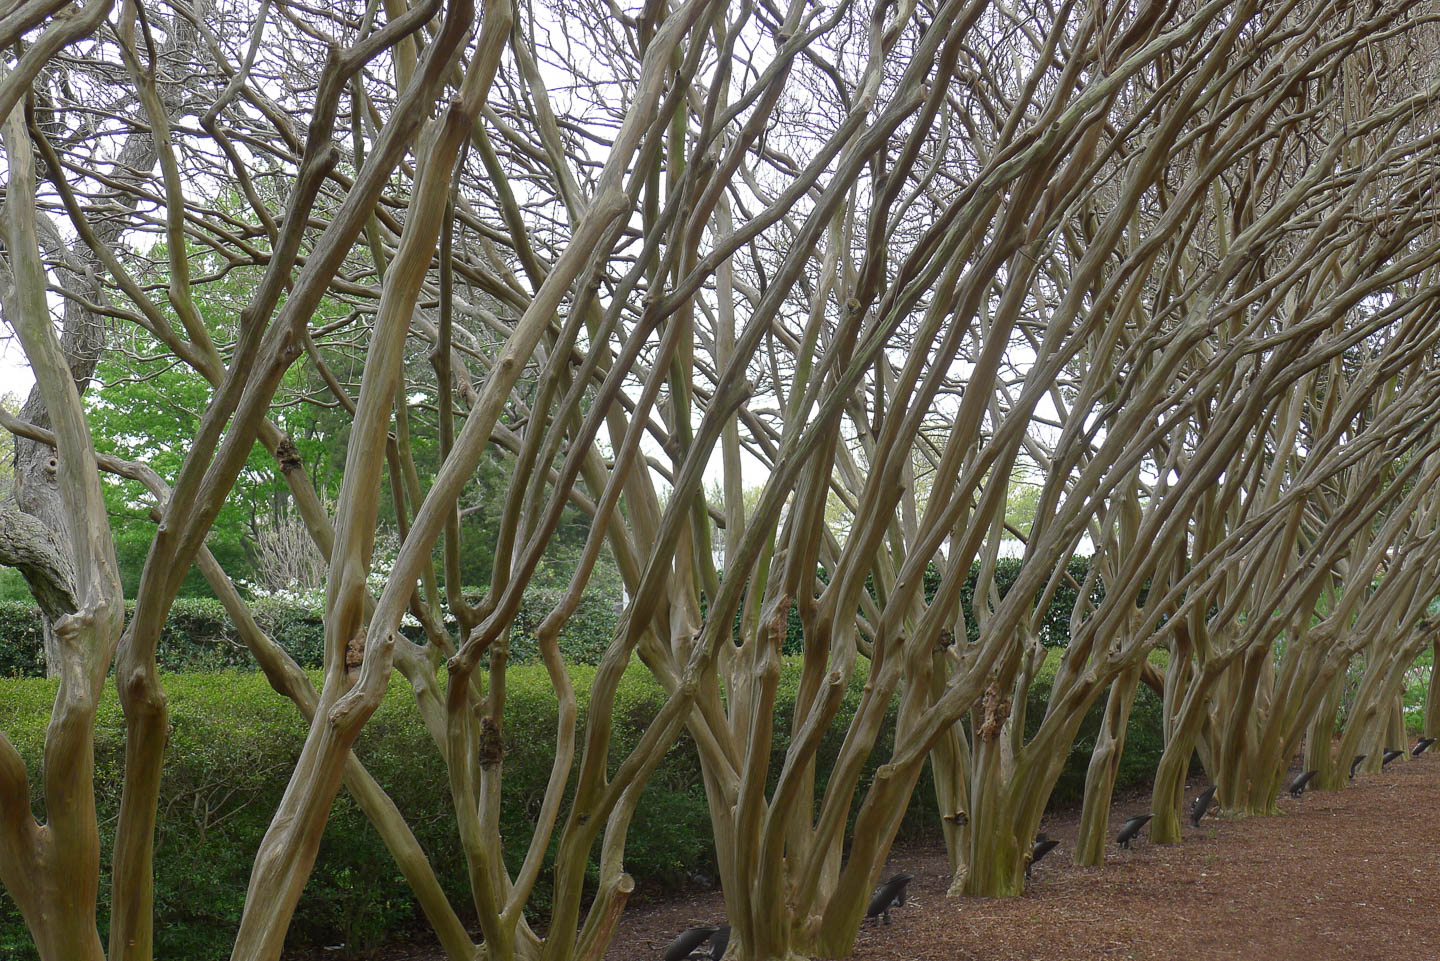 Crapemyrtle hedge with no leaves in the winter